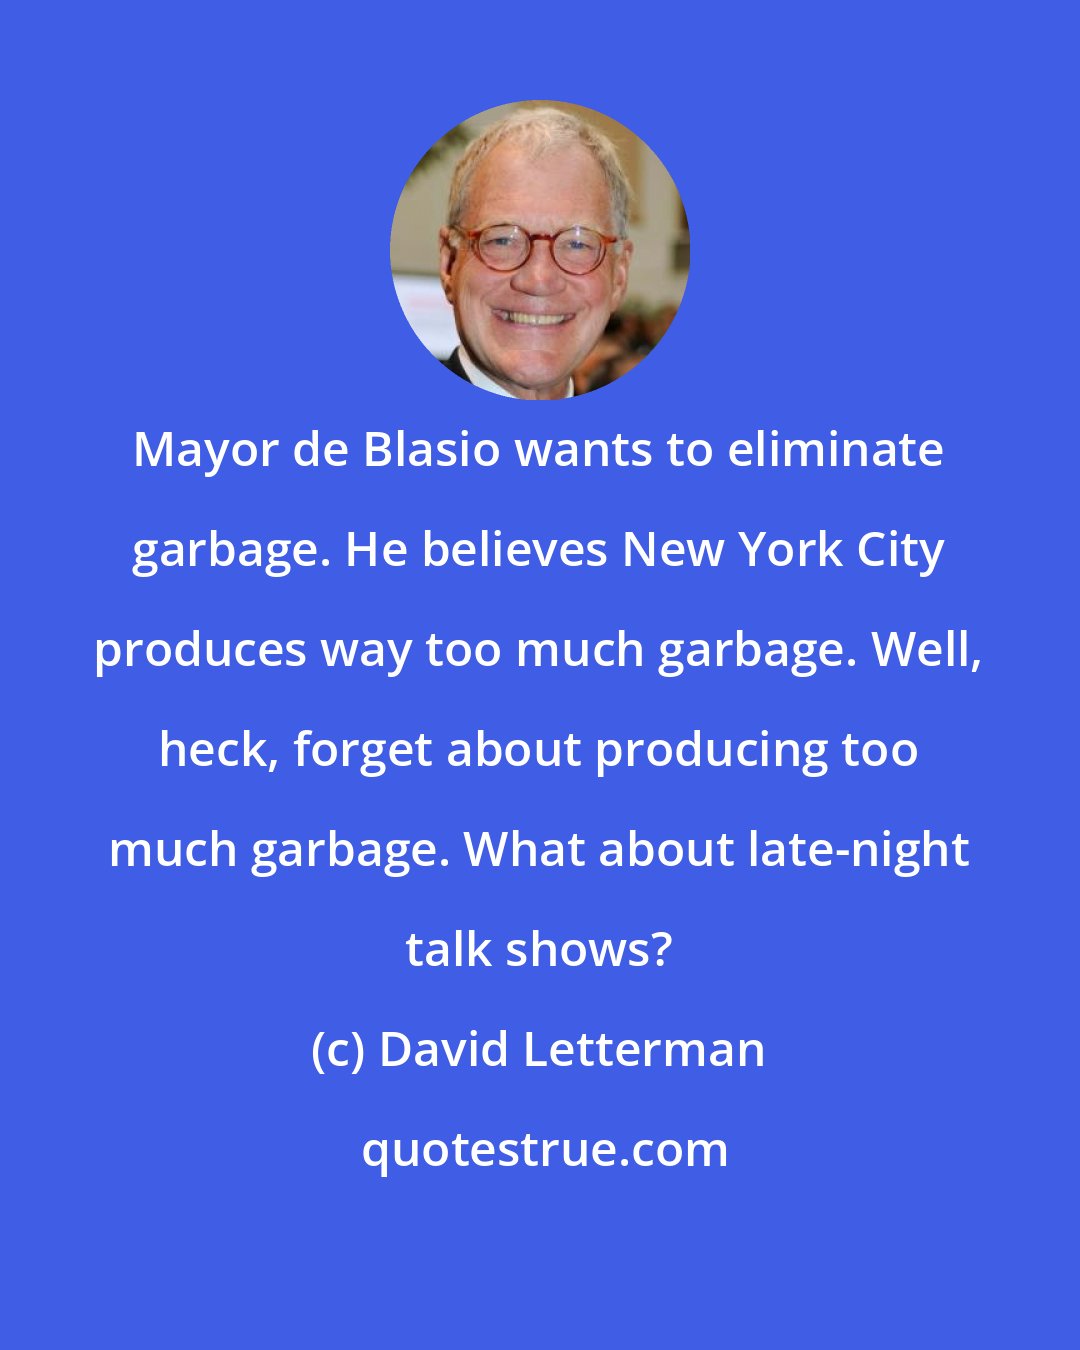 David Letterman: Mayor de Blasio wants to eliminate garbage. He believes New York City produces way too much garbage. Well, heck, forget about producing too much garbage. What about late-night talk shows?